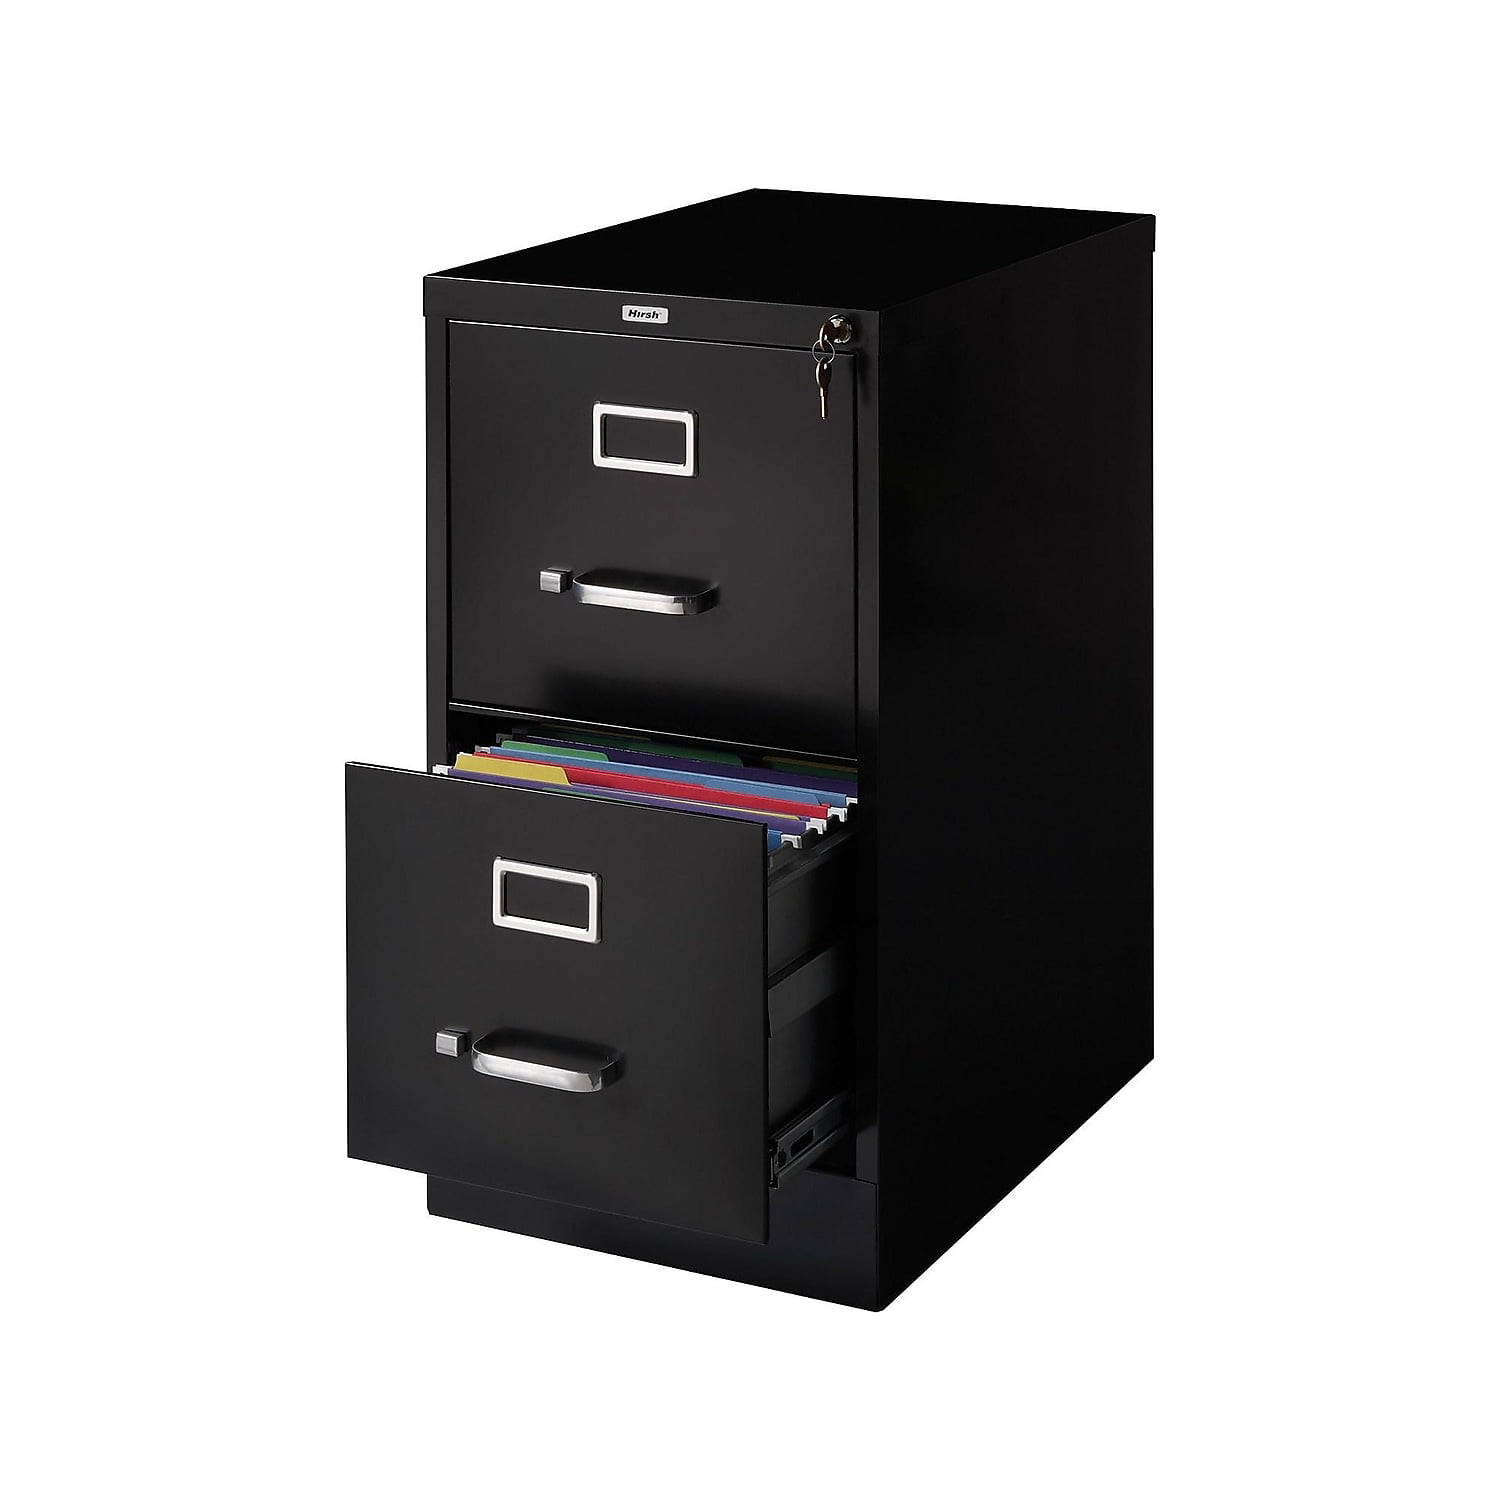 Details about   Metal Filing Cabinet Lock with 2 keys **FREE 48HR TRACKED DELIVERY** Mastered 